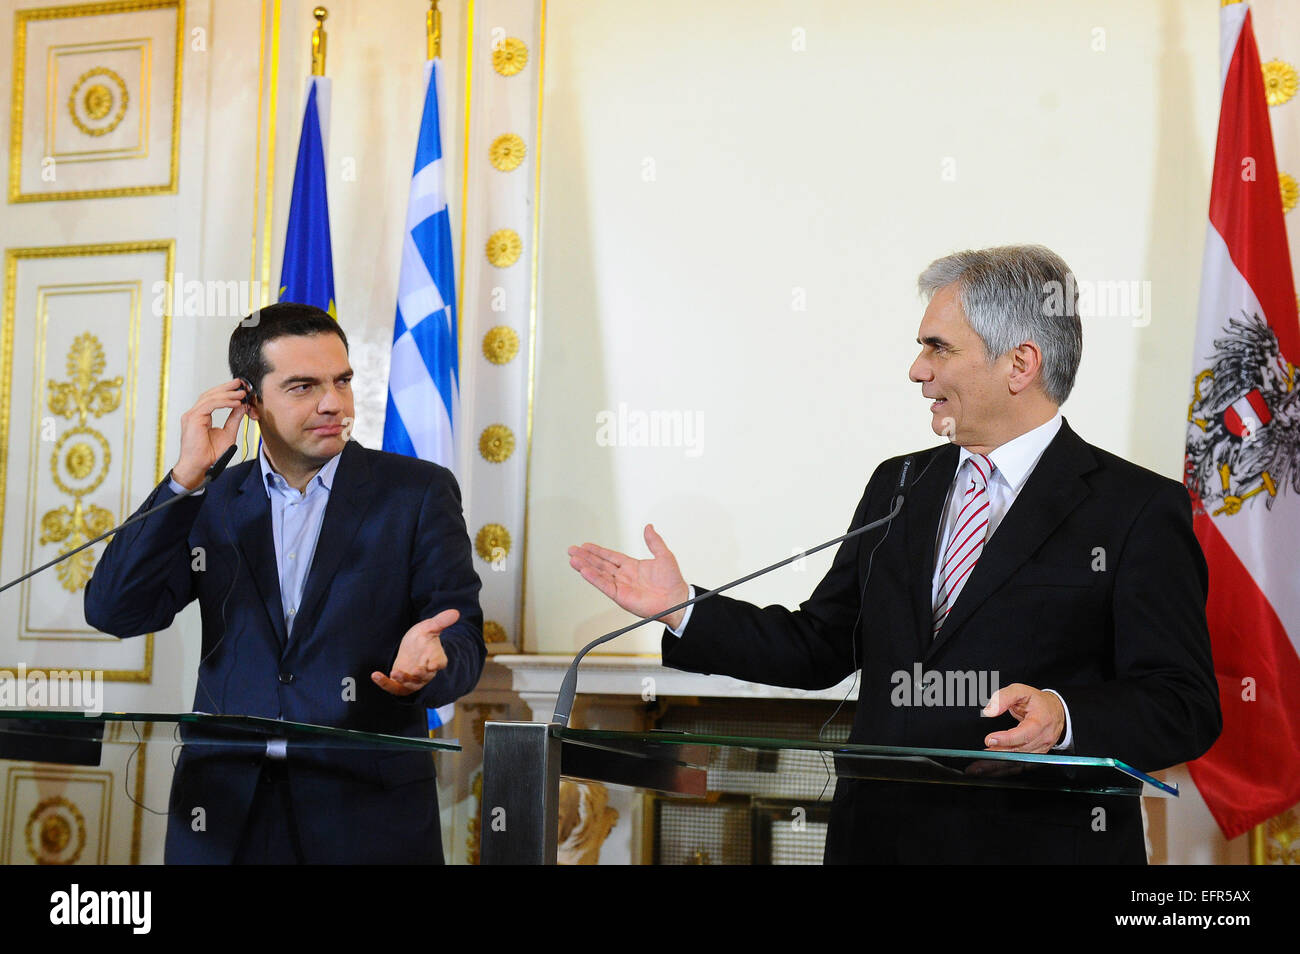 (150209) -- VIENNA, Feb. 9, 2015 (Xinhua) -- Austrian Chancellor Werner Faymann (R) and Greece's Prime Minister Alexis Tsipras attend a joint press briefing after their meeting in Vienna, capital of Austria, on Feb. 9, 2015. Greece's newly elected Prime Minister Alexis Tsipras said on Monday he was confident of striking a deal with European partners. (Xinhua/Qian Yi) Stock Photo